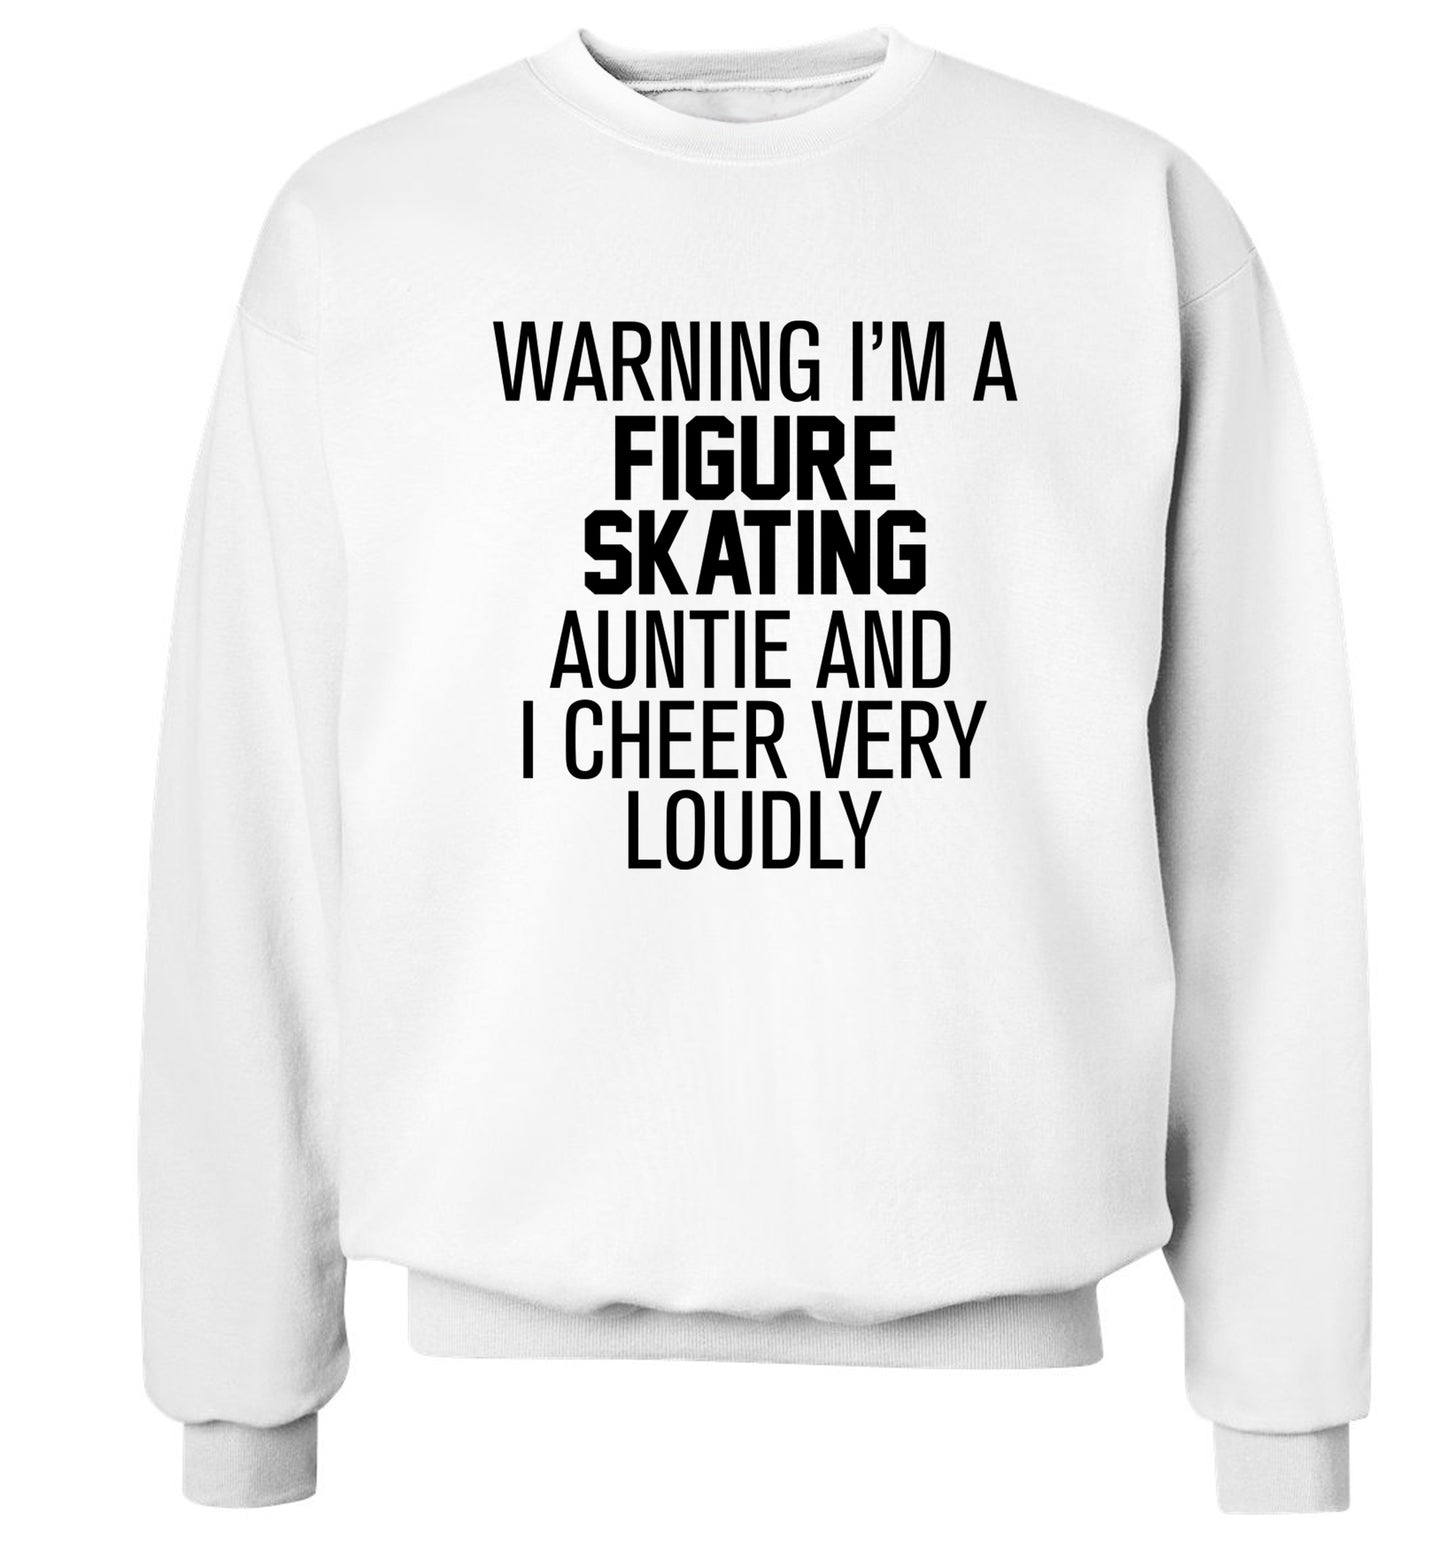 Warning I'm a figure skating auntie and I cheer very loudly Adult's unisexwhite Sweater 2XL